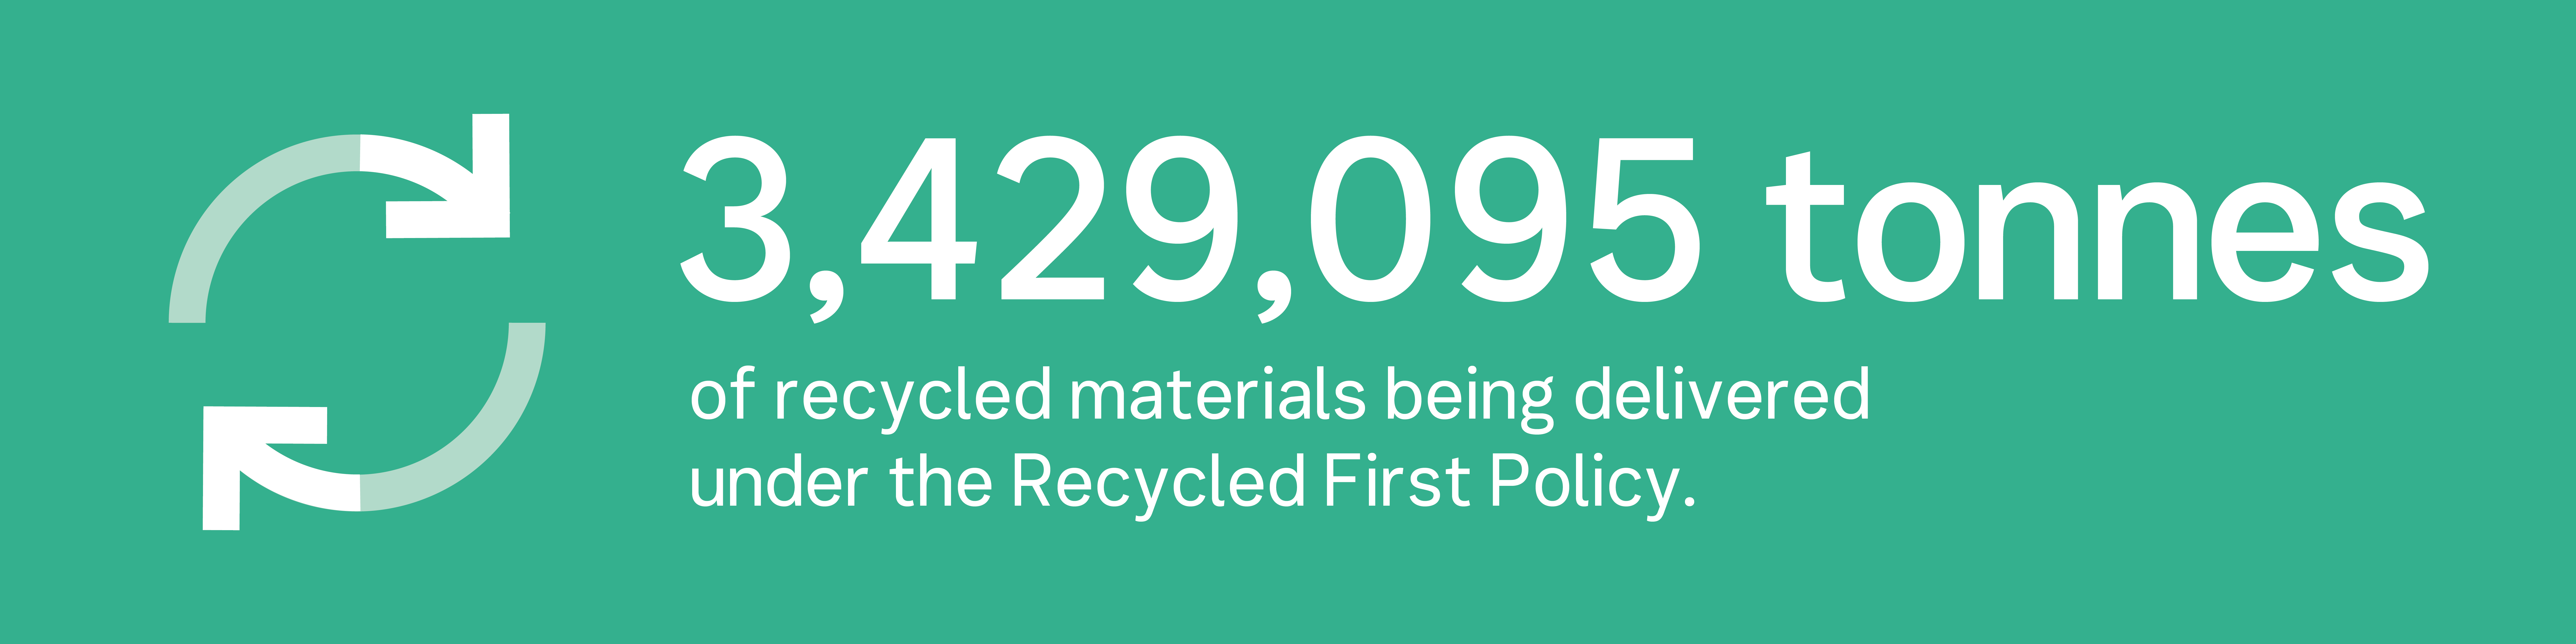 1,312,720 tonnes of recycled materials being delivered under the Recycled First Policy. Enough to fill half of the MCG.